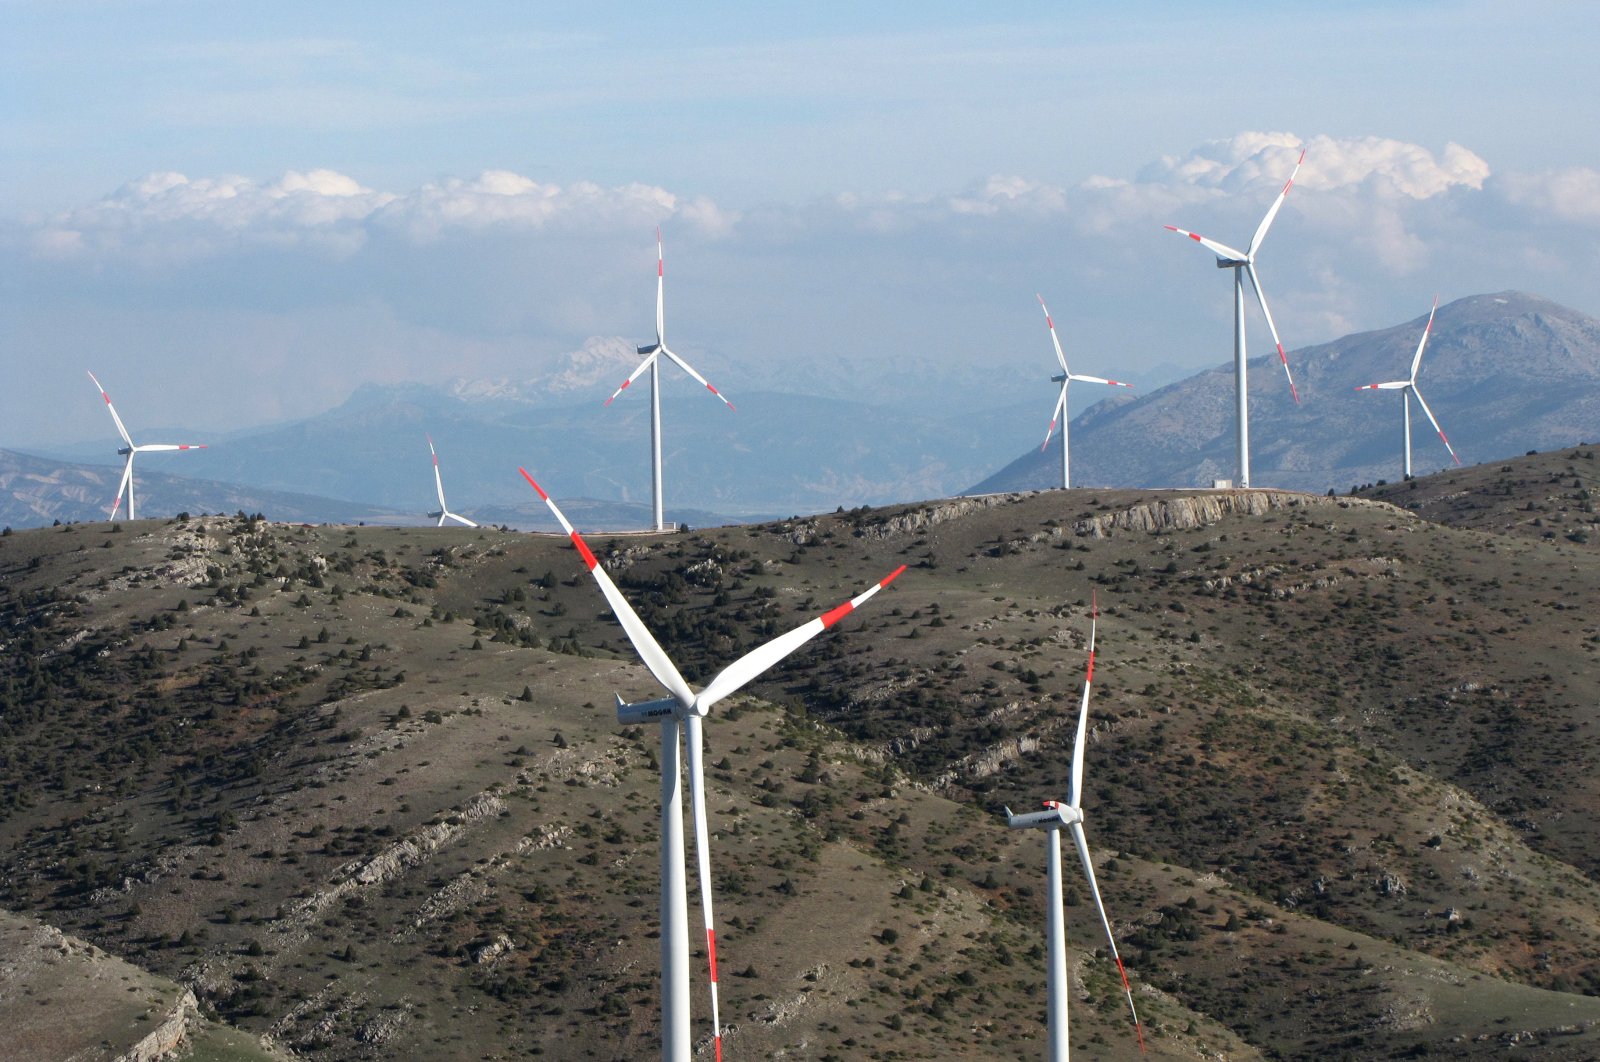 Wind turbines are seen in the Dinar district of Turkey's western province of Afyonkarahisar, March 28, 2019. (AA Photo)